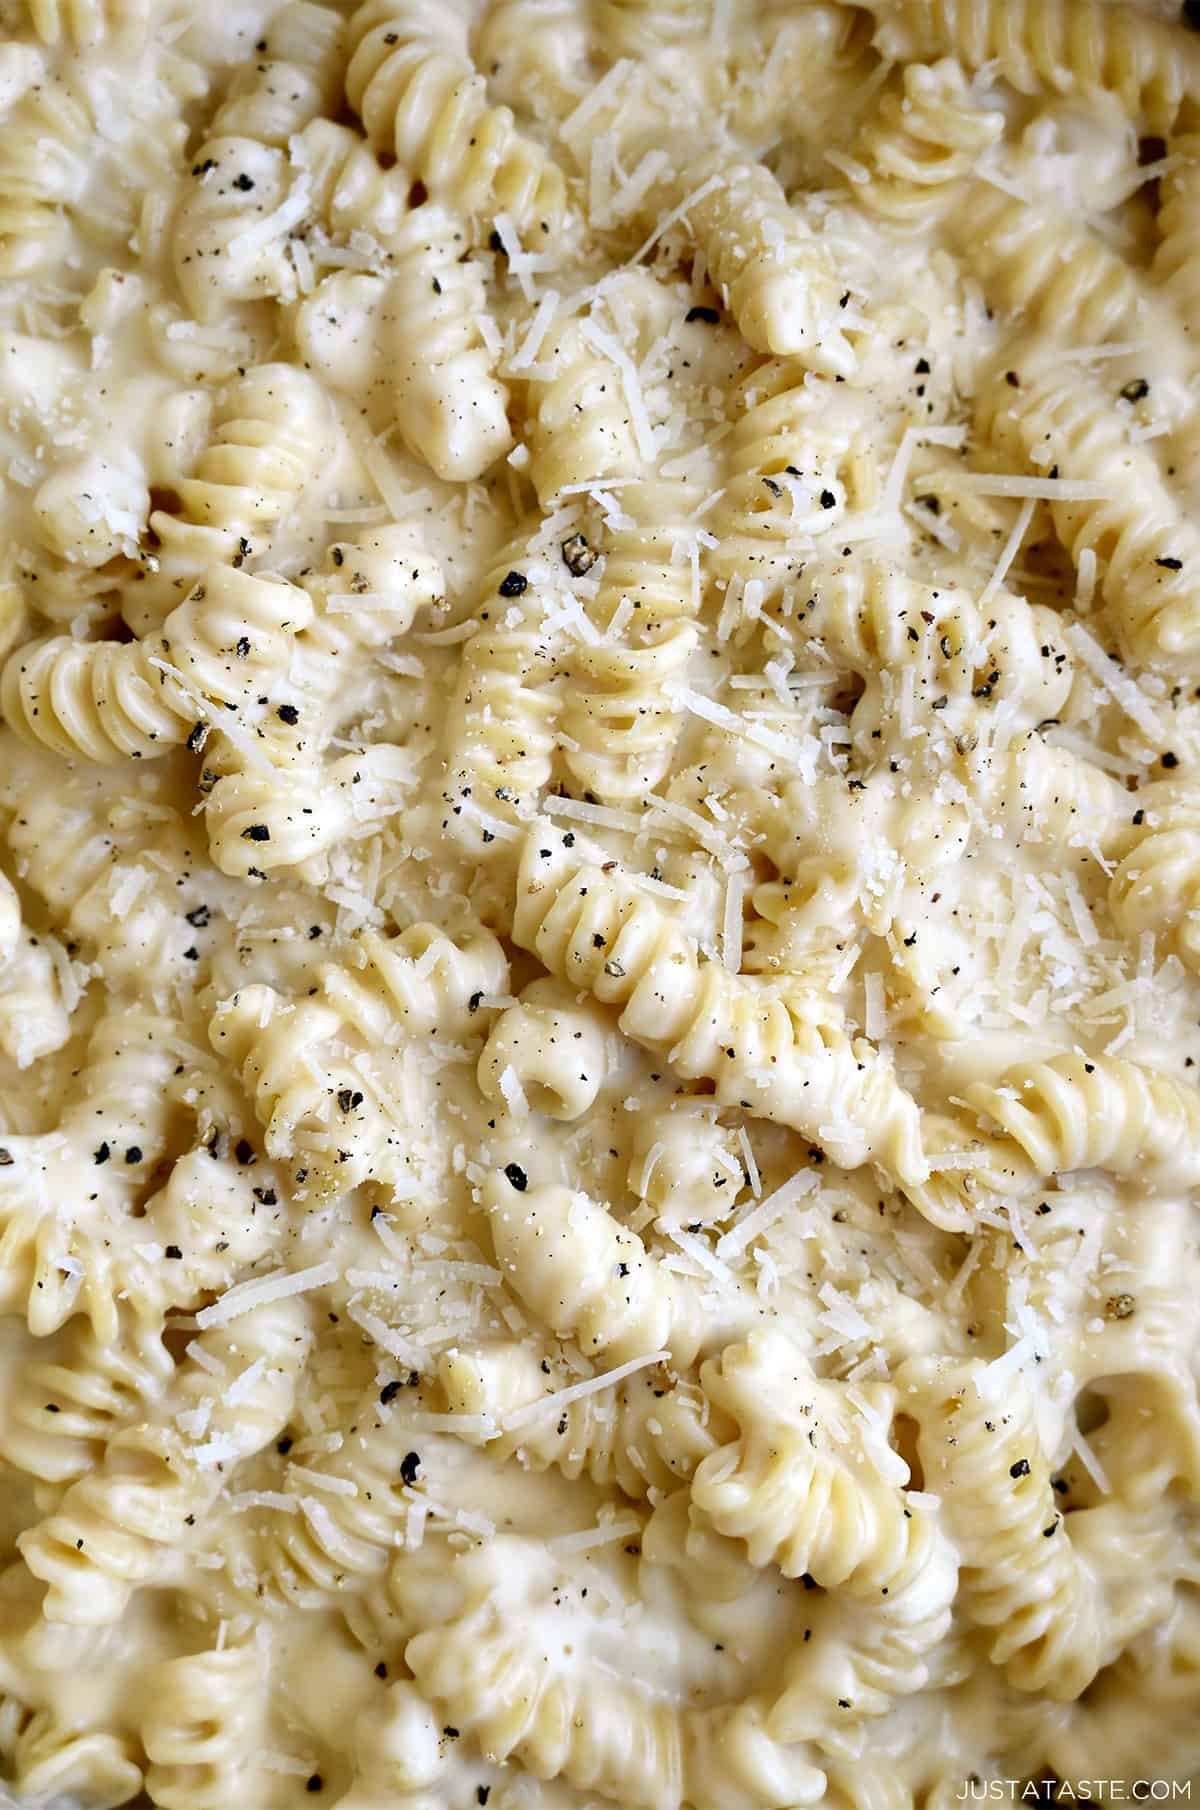 Extra-cheesy macaroni and cheese garnished with shredded Parmesan and cracked black pepper.